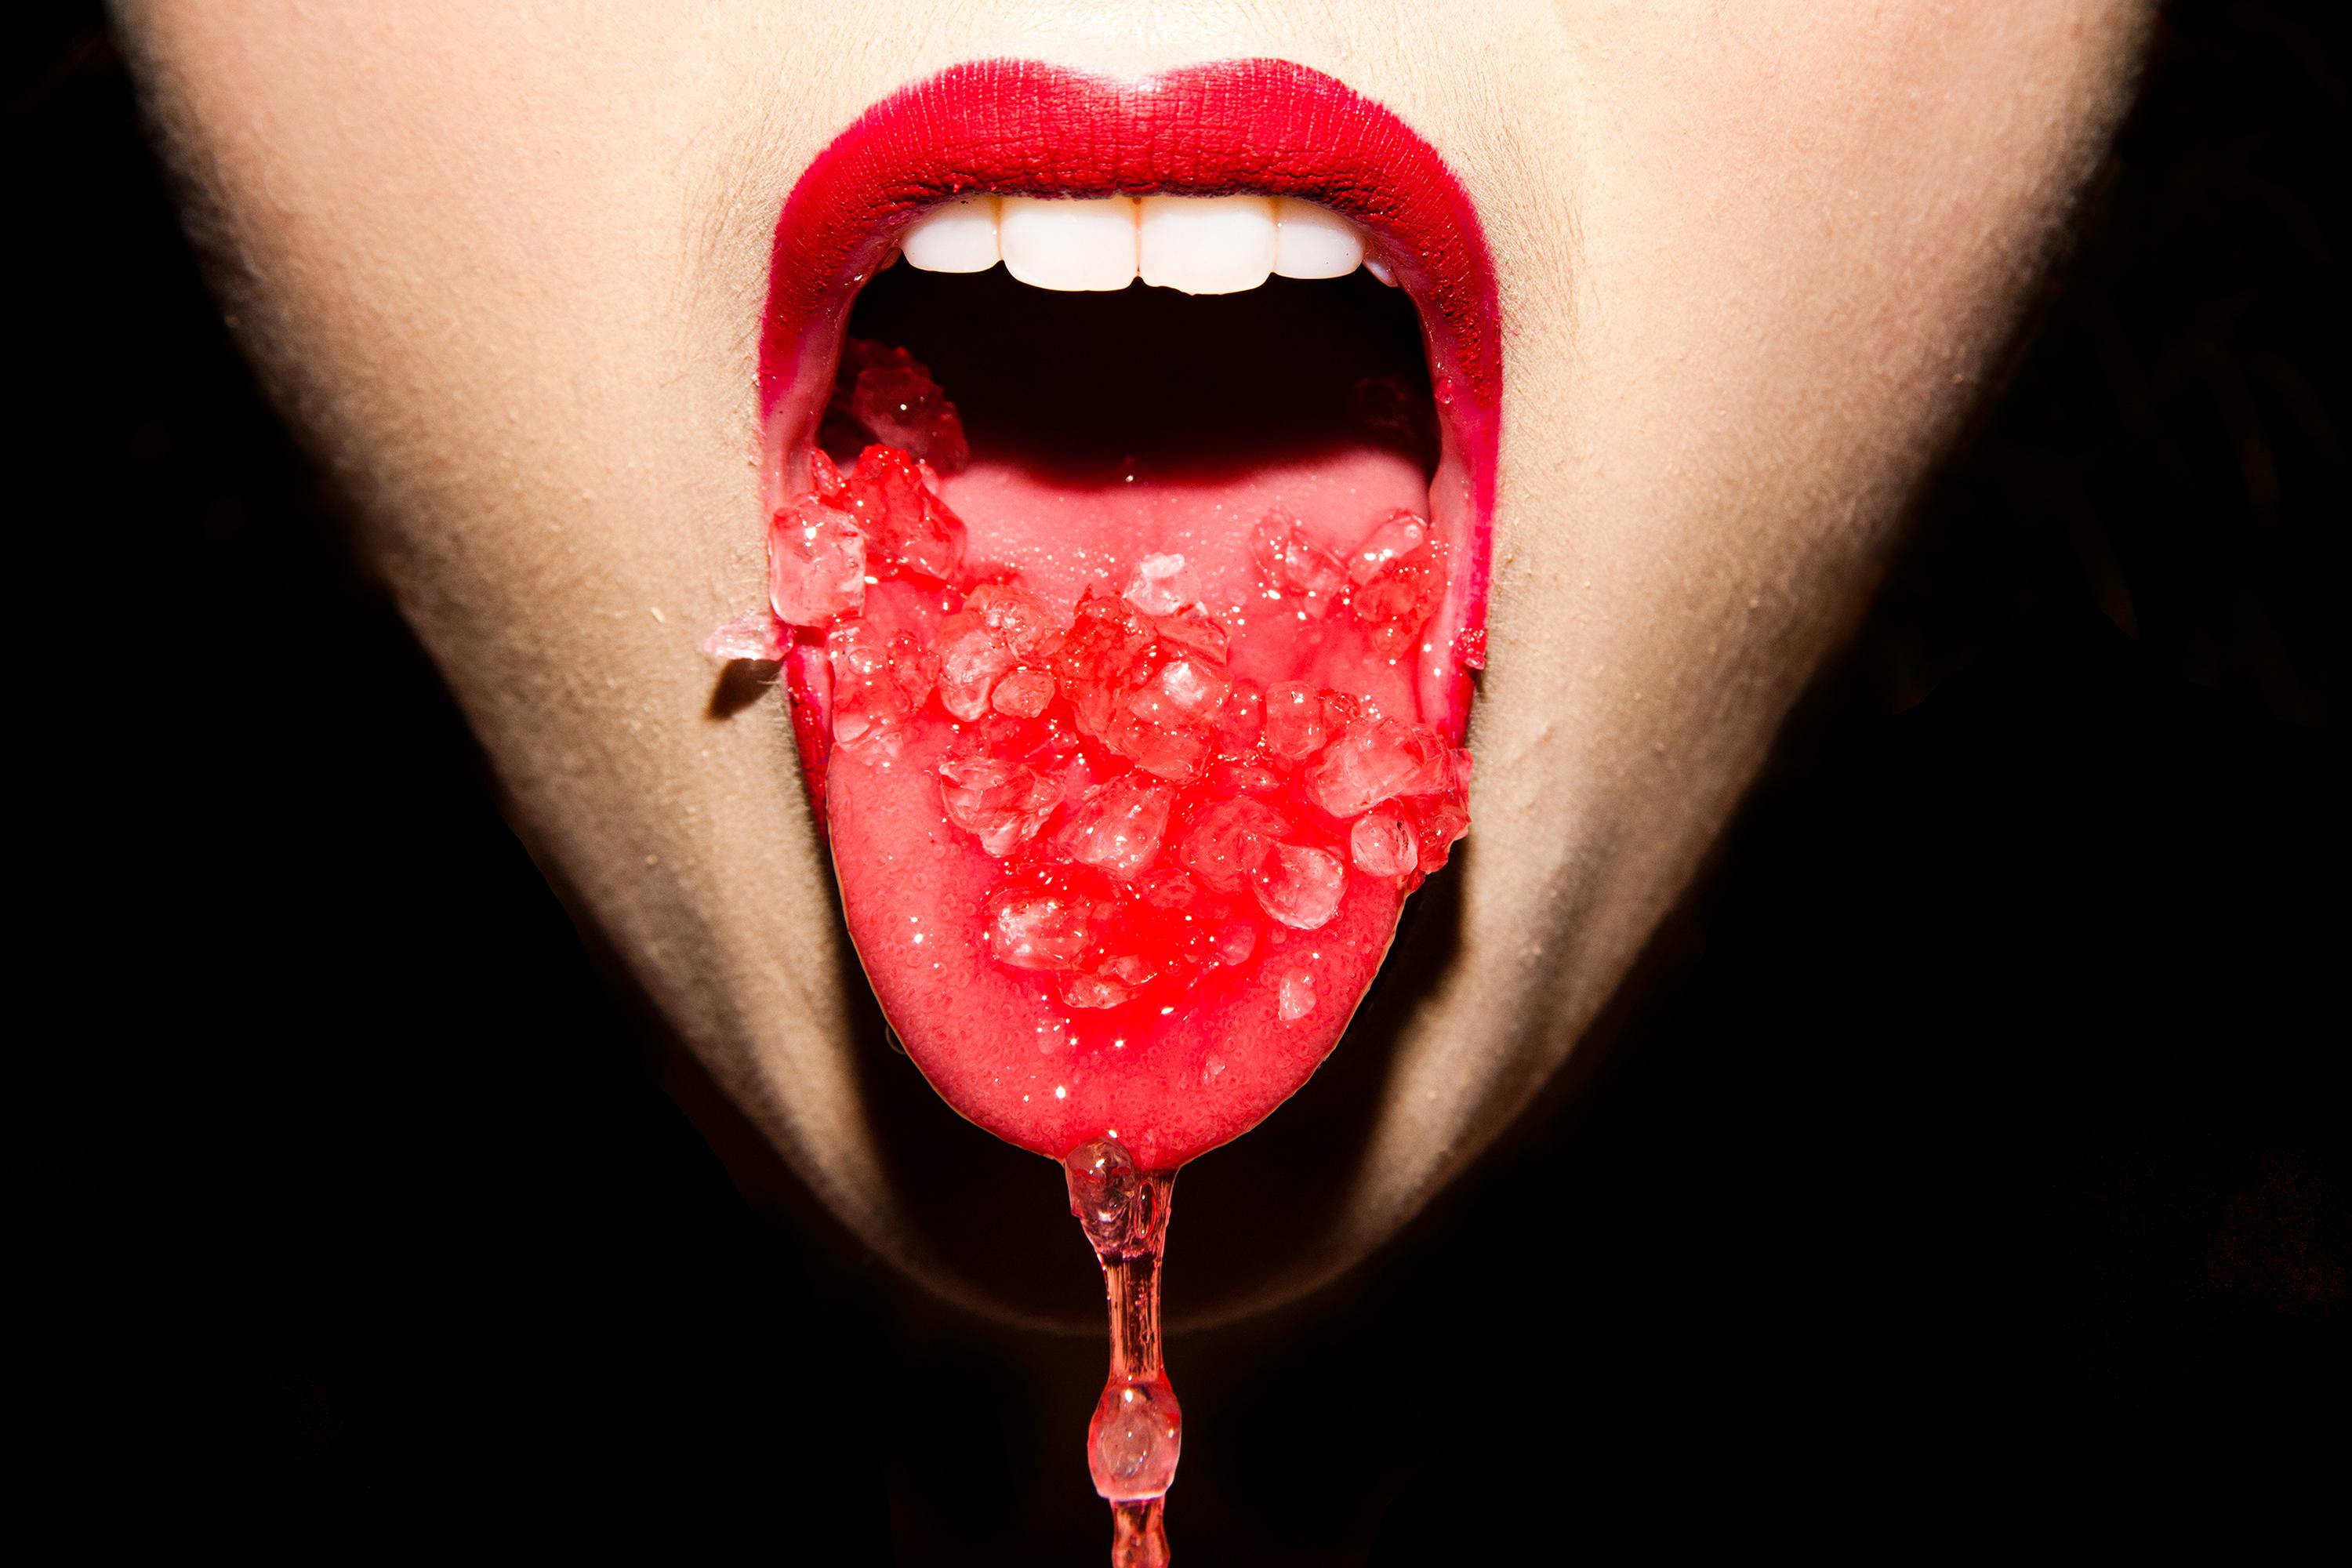 Tyler Shields Color Photograph - Mouth Drip (20" x 30")